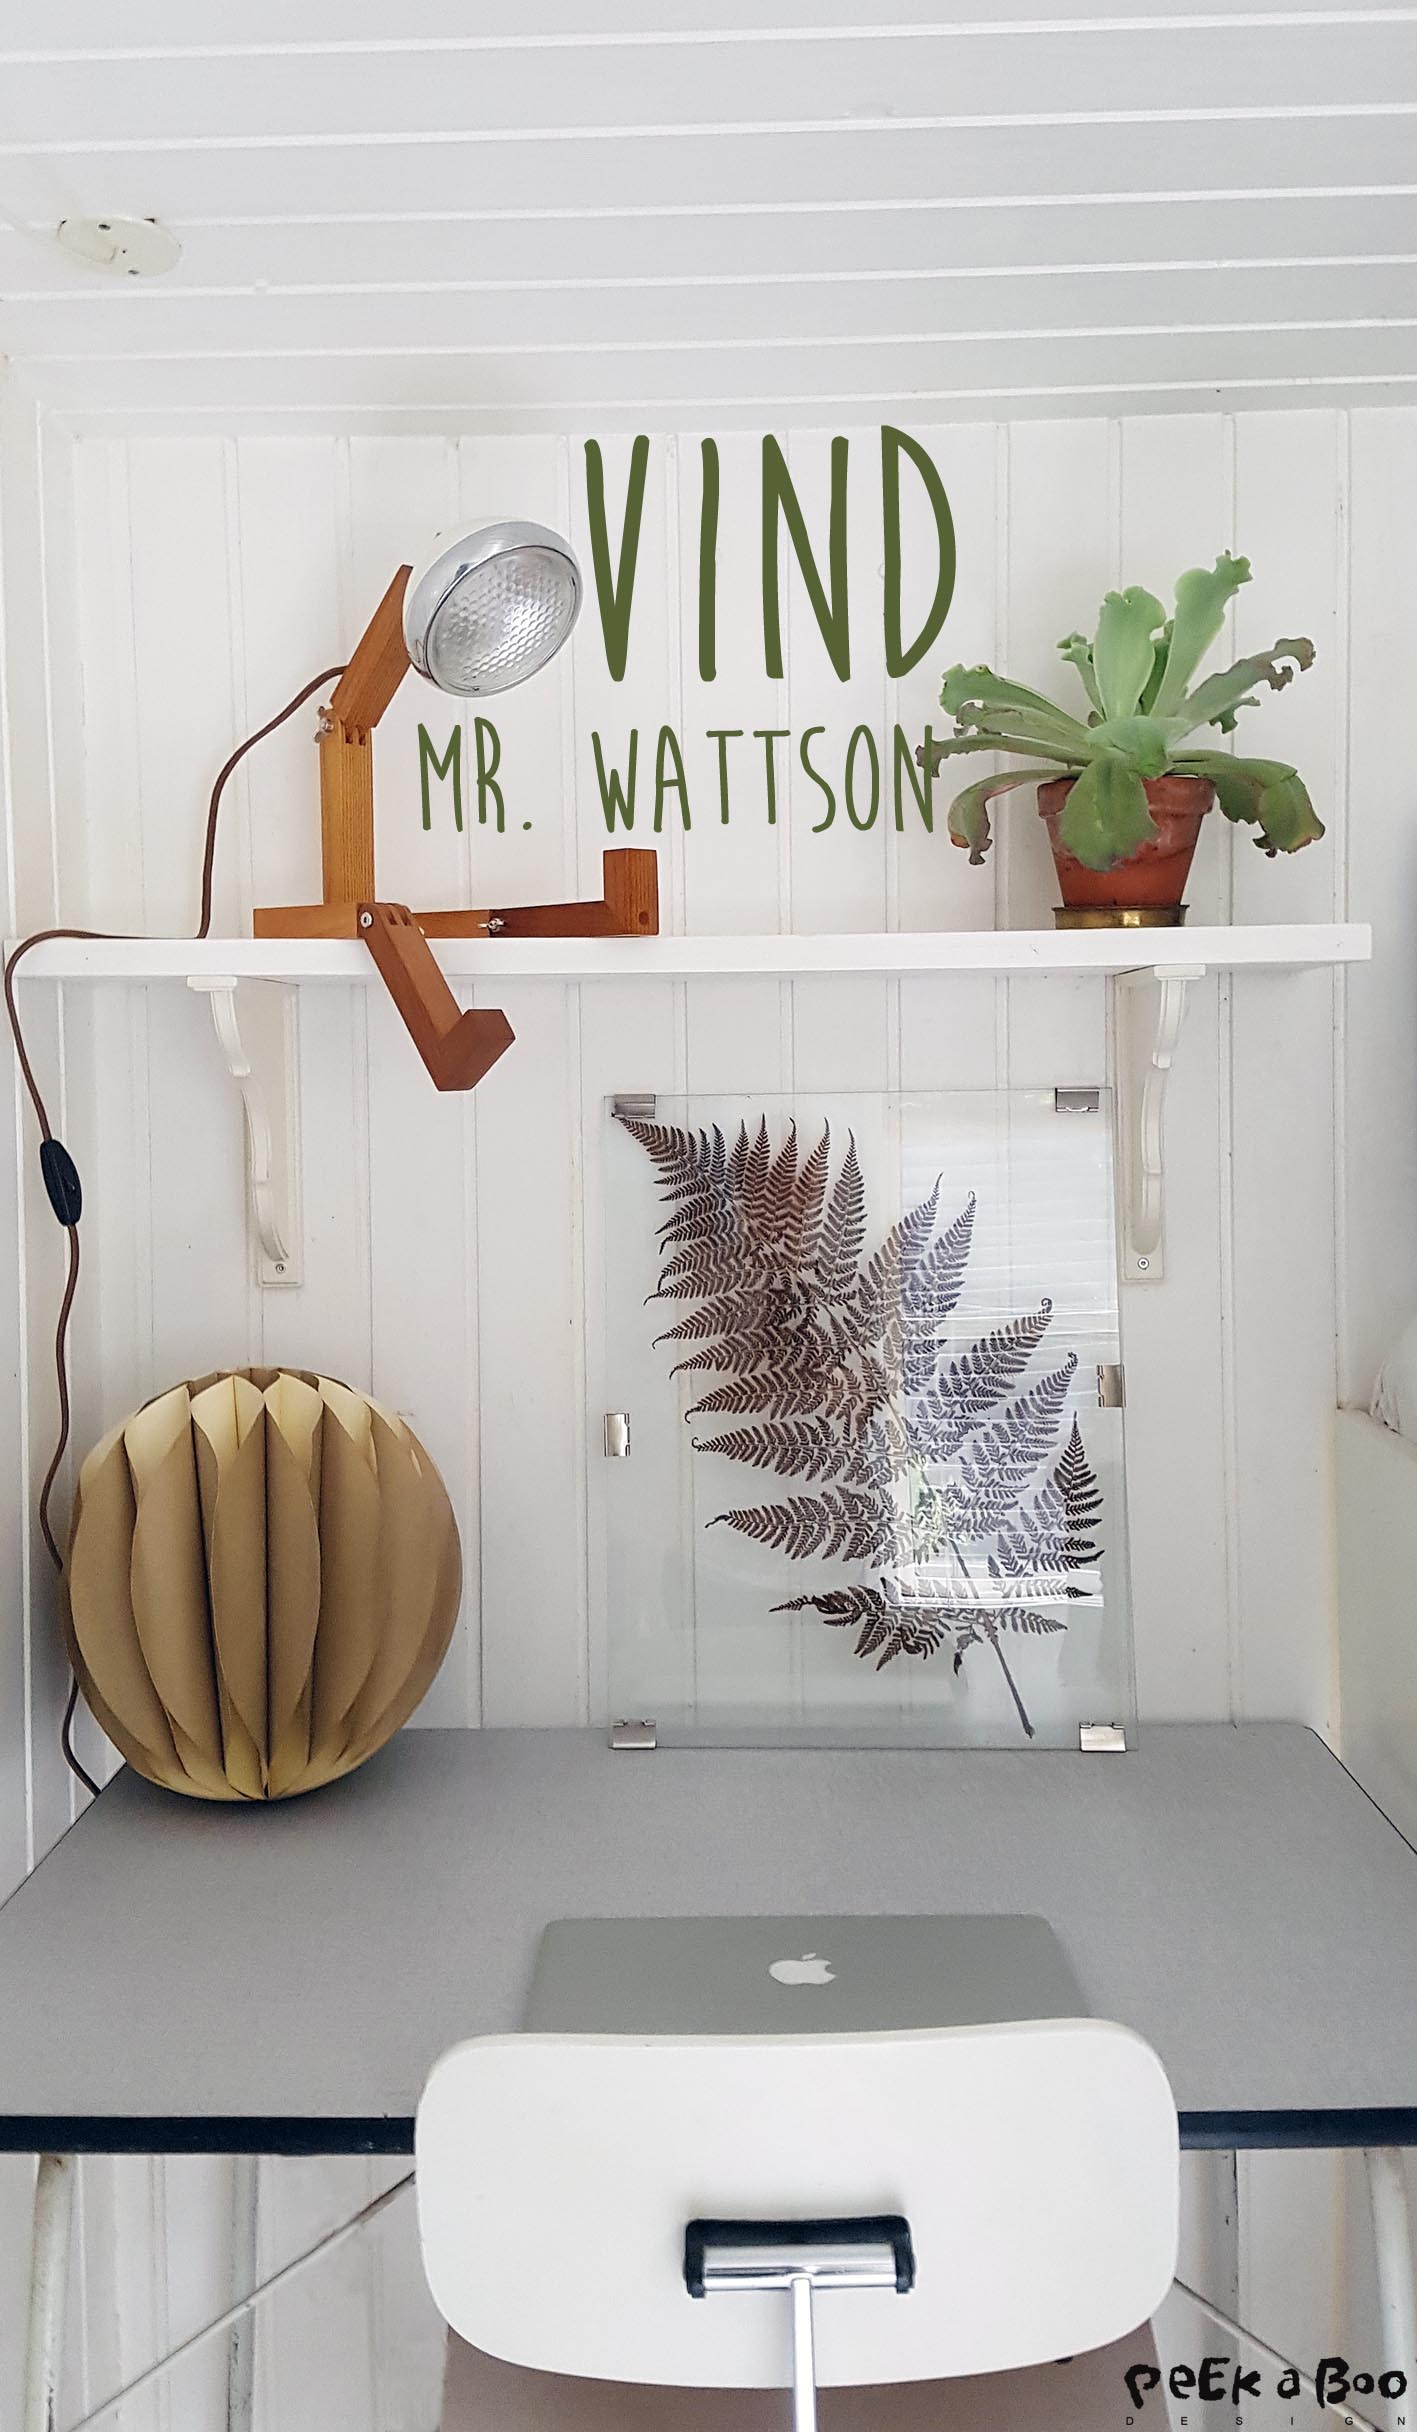 You now get the chance to win this lamp made of ash tree and a vintage car inspired headlight. It is called Mr. Watson and can be yours if you participate here.